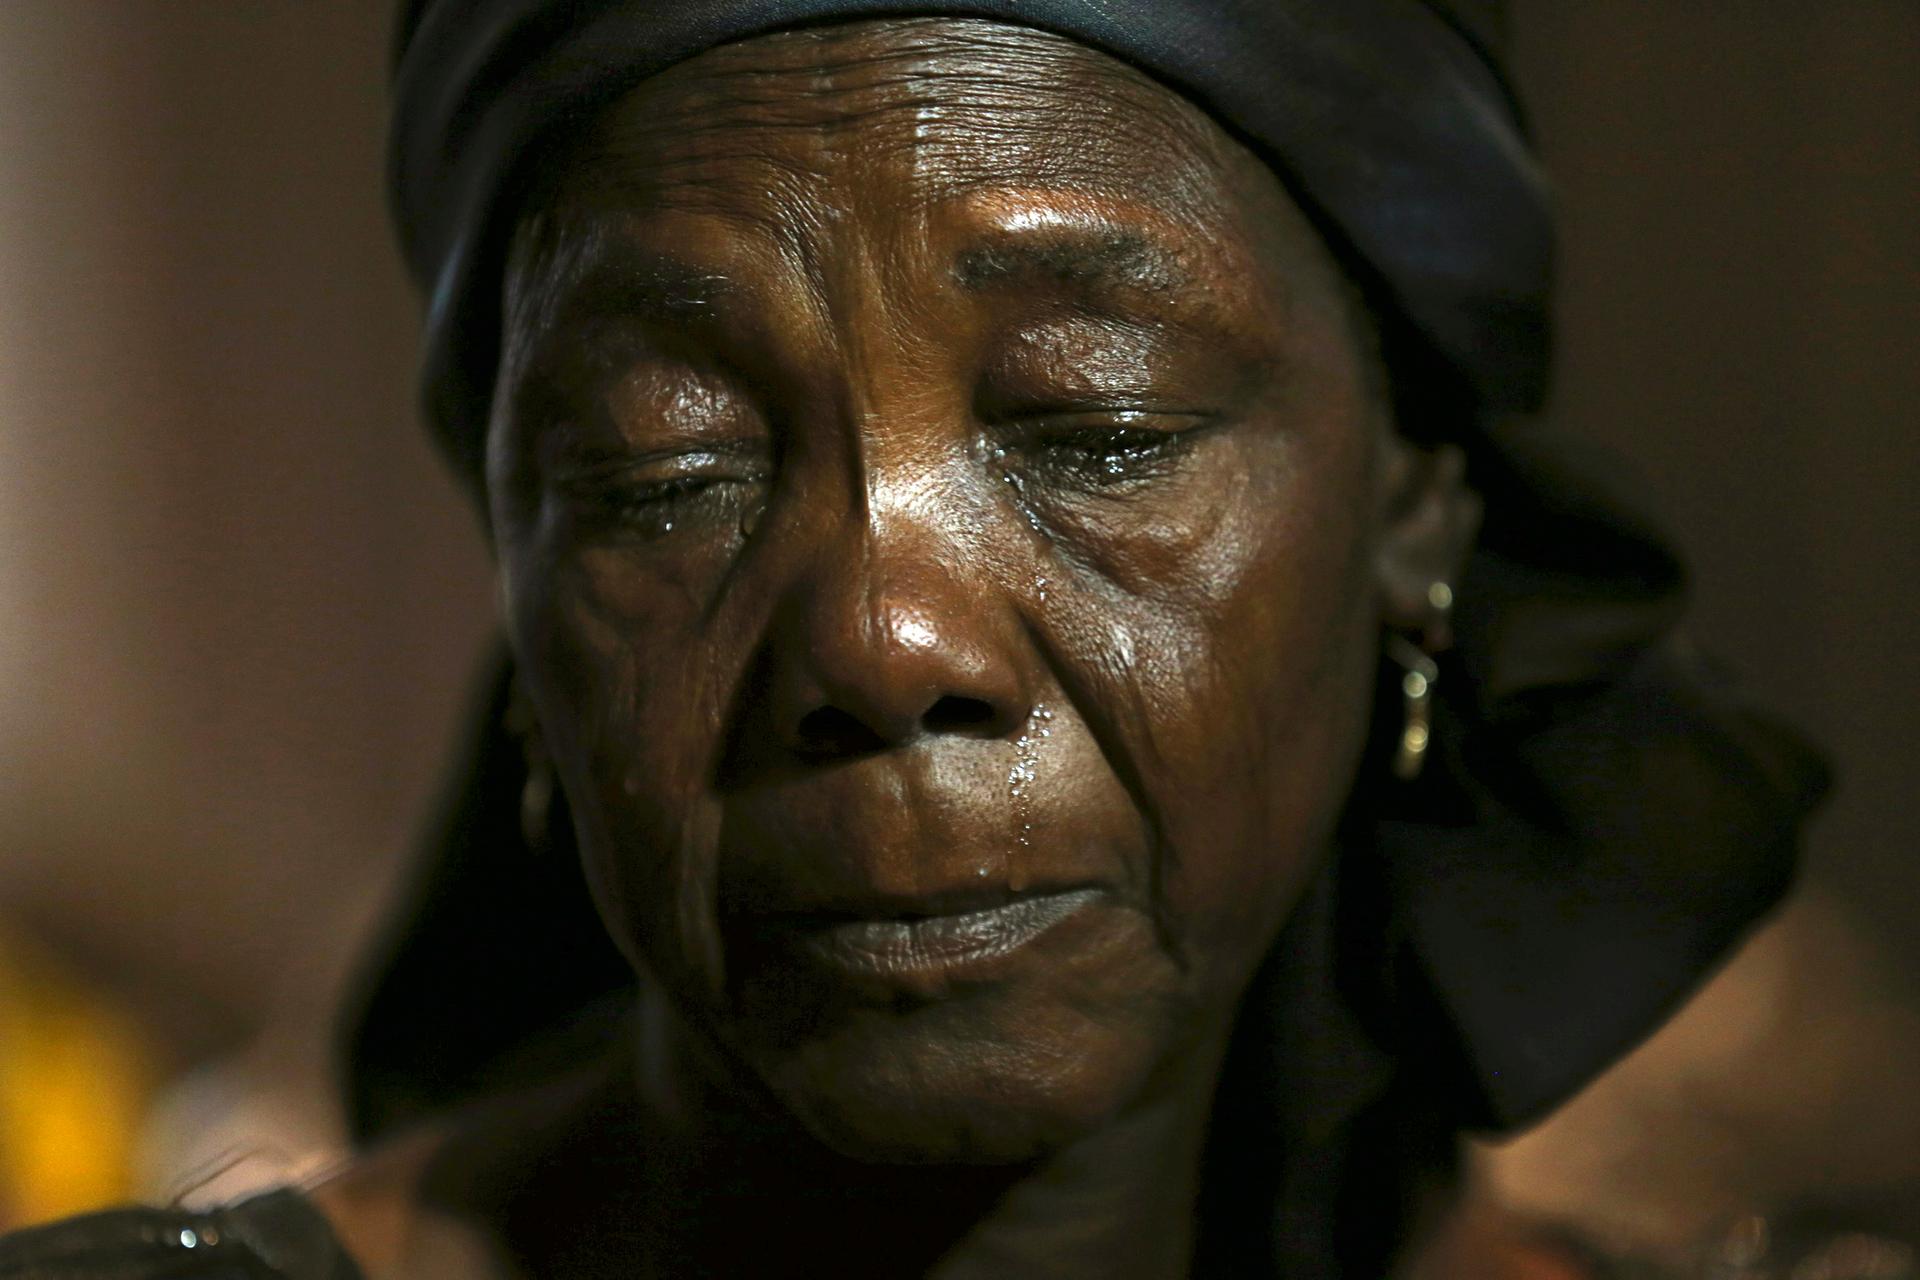 Hauwa Nkaki, mother of one of more than 200 girls abducted in the remote village of Chibok.